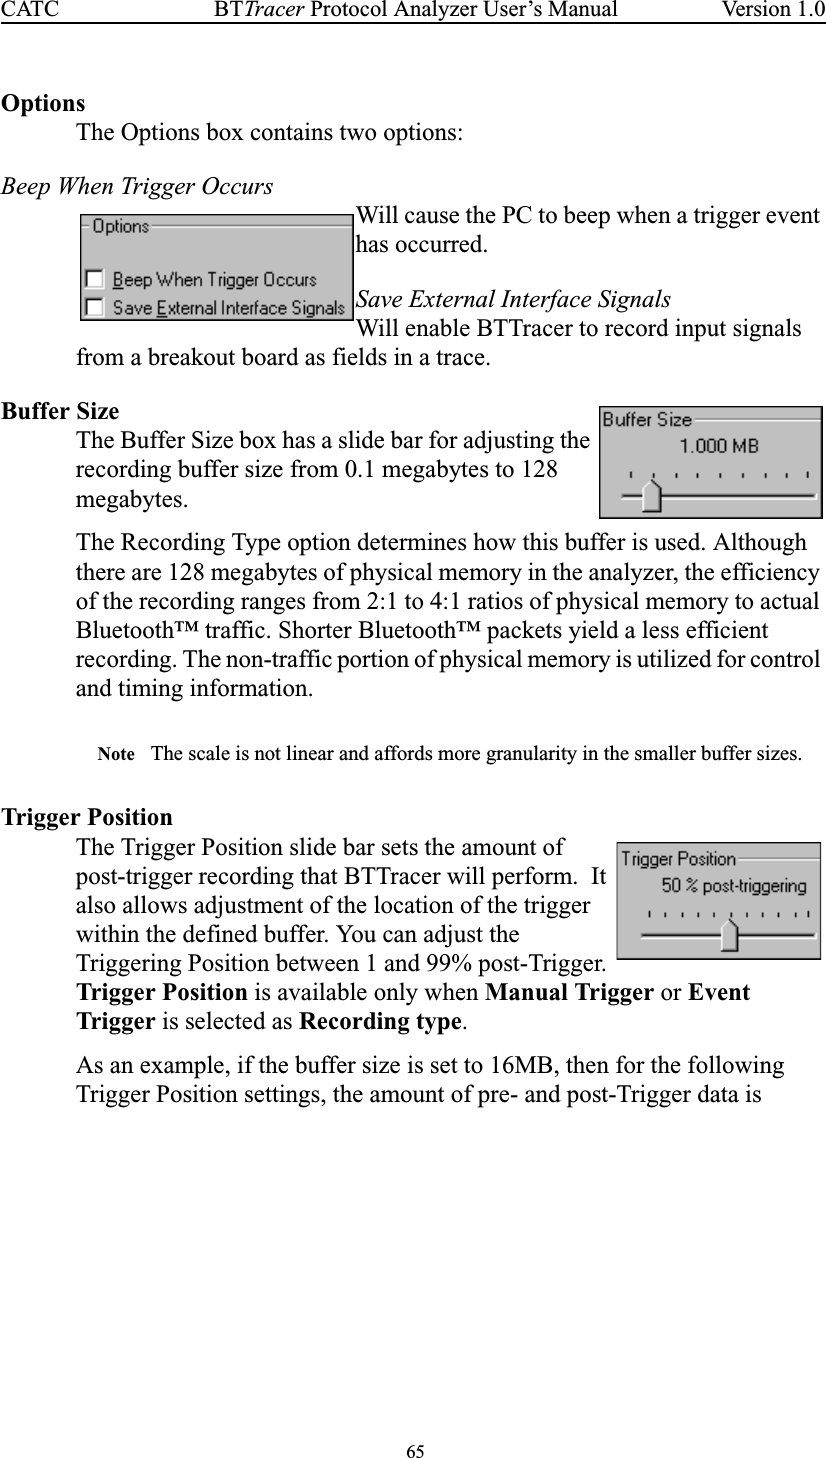 65BTTracer Protocol Analyzer User’s ManualCATC Version 1.0OptionsThe Options box contains two options:Beep When Trigger OccursWill cause the PC to beep when a trigger eventhas occurred.Save External Interface SignalsWill enable BTTracer to record input signalsfrom a breakout board as fields in a trace.Buffer SizeThe Buffer Size box has a slide bar for adjusting therecording buffer size from 0.1 megabytes to 128megabytes.The Recording Type option determines how this buffer is used. Althoughthere are 128 megabytes of physical memory in the analyzer, the efficiencyof the recording ranges from 2:1 to 4:1 ratios of physical memory to actualBluetooth™ traffic. Shorter Bluetooth™ packets yield a less efficientrecording. The non-traffic portion of physical memory is utilized for controland timing information.Note The scale is not linear and affords more granularity in the smaller buffer sizes.Trigger PositionThe Trigger Position slide bar sets the amount ofpost-trigger recording that BTTracer will perform. Italso allows adjustment of the location of the triggerwithin the defined buffer. You can adjust theTriggering Position between 1 and 99% post-Trigger.Trigger Position is available only when Manual Trigger or EventTrigger is selected as Recording type.As an example, if the buffer size is set to 16MB, then for the followingTrigger Position settings, the amount of pre- and post-Trigger data is